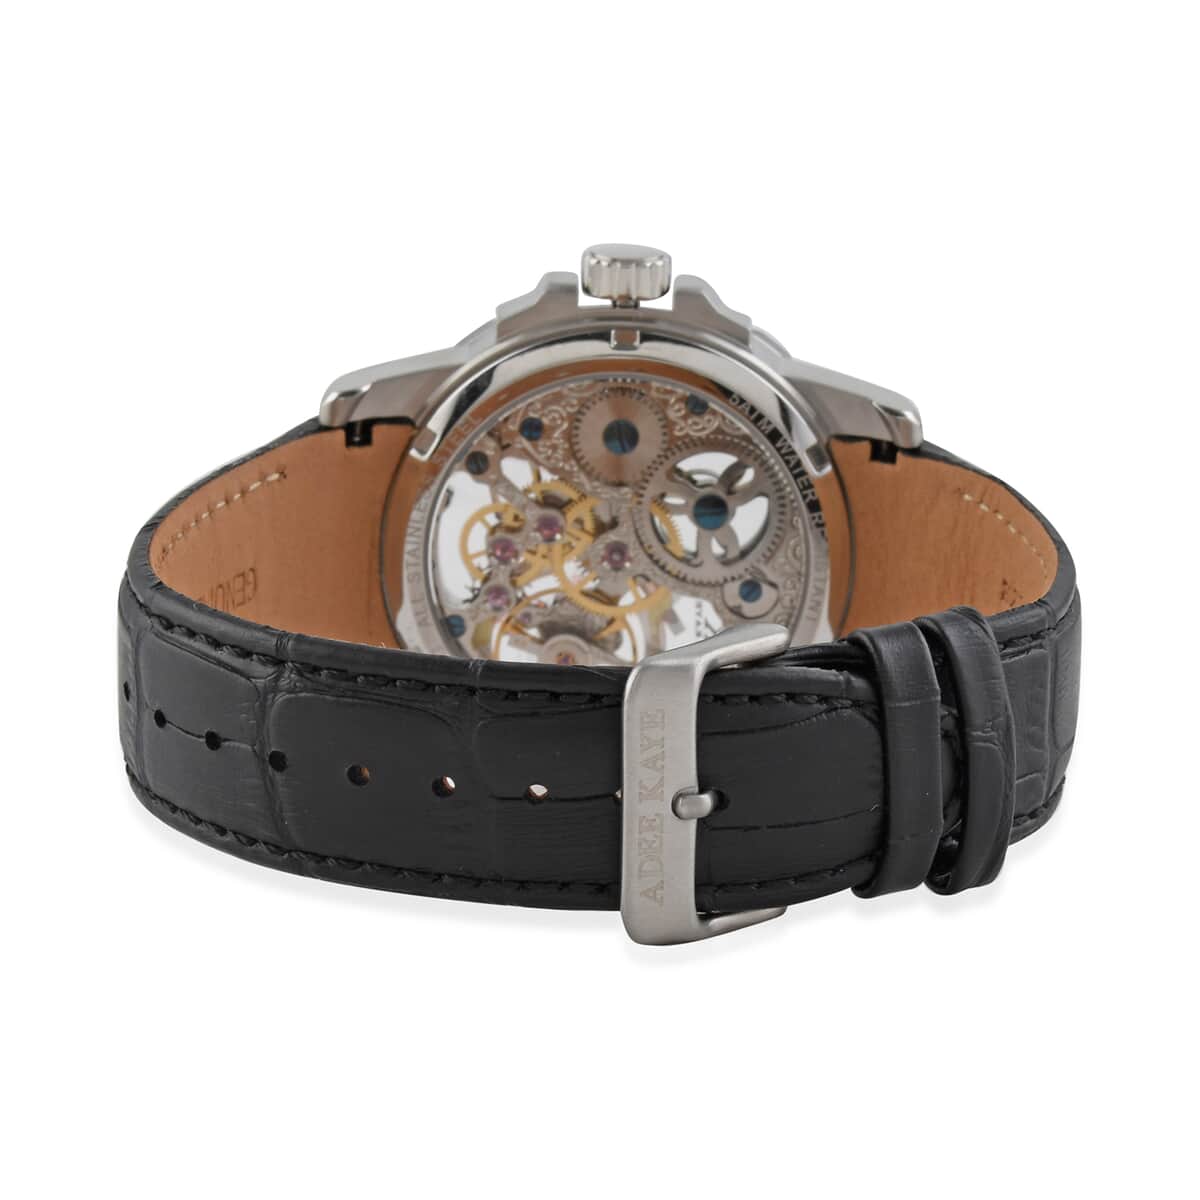 ADEE KAYE La Gear Mechanical Movement Watch with Genuine Leather Strap in Black (48mm) image number 3